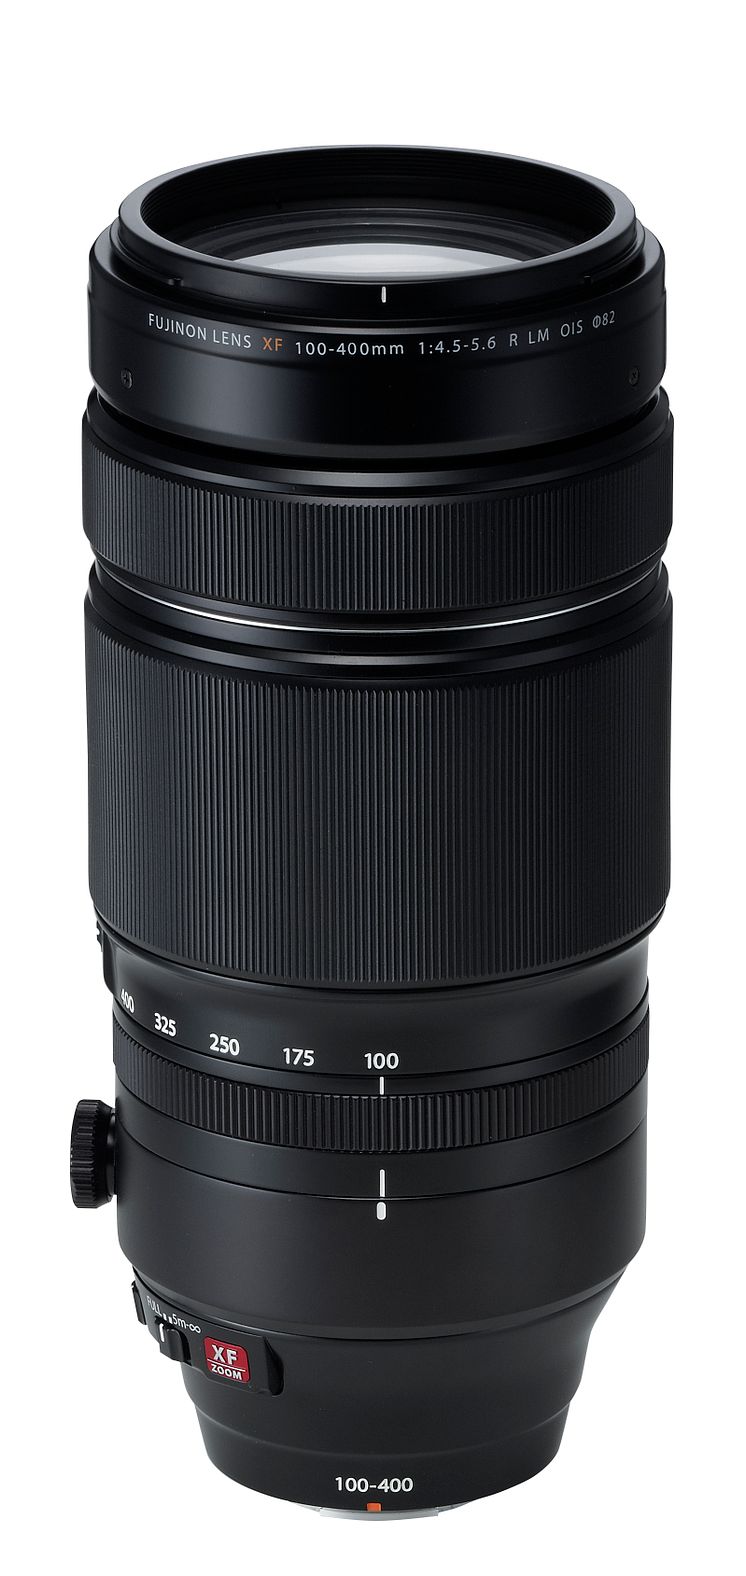 FUJINON XF100-400mmF4.5-5.6 R LM OIS WR front